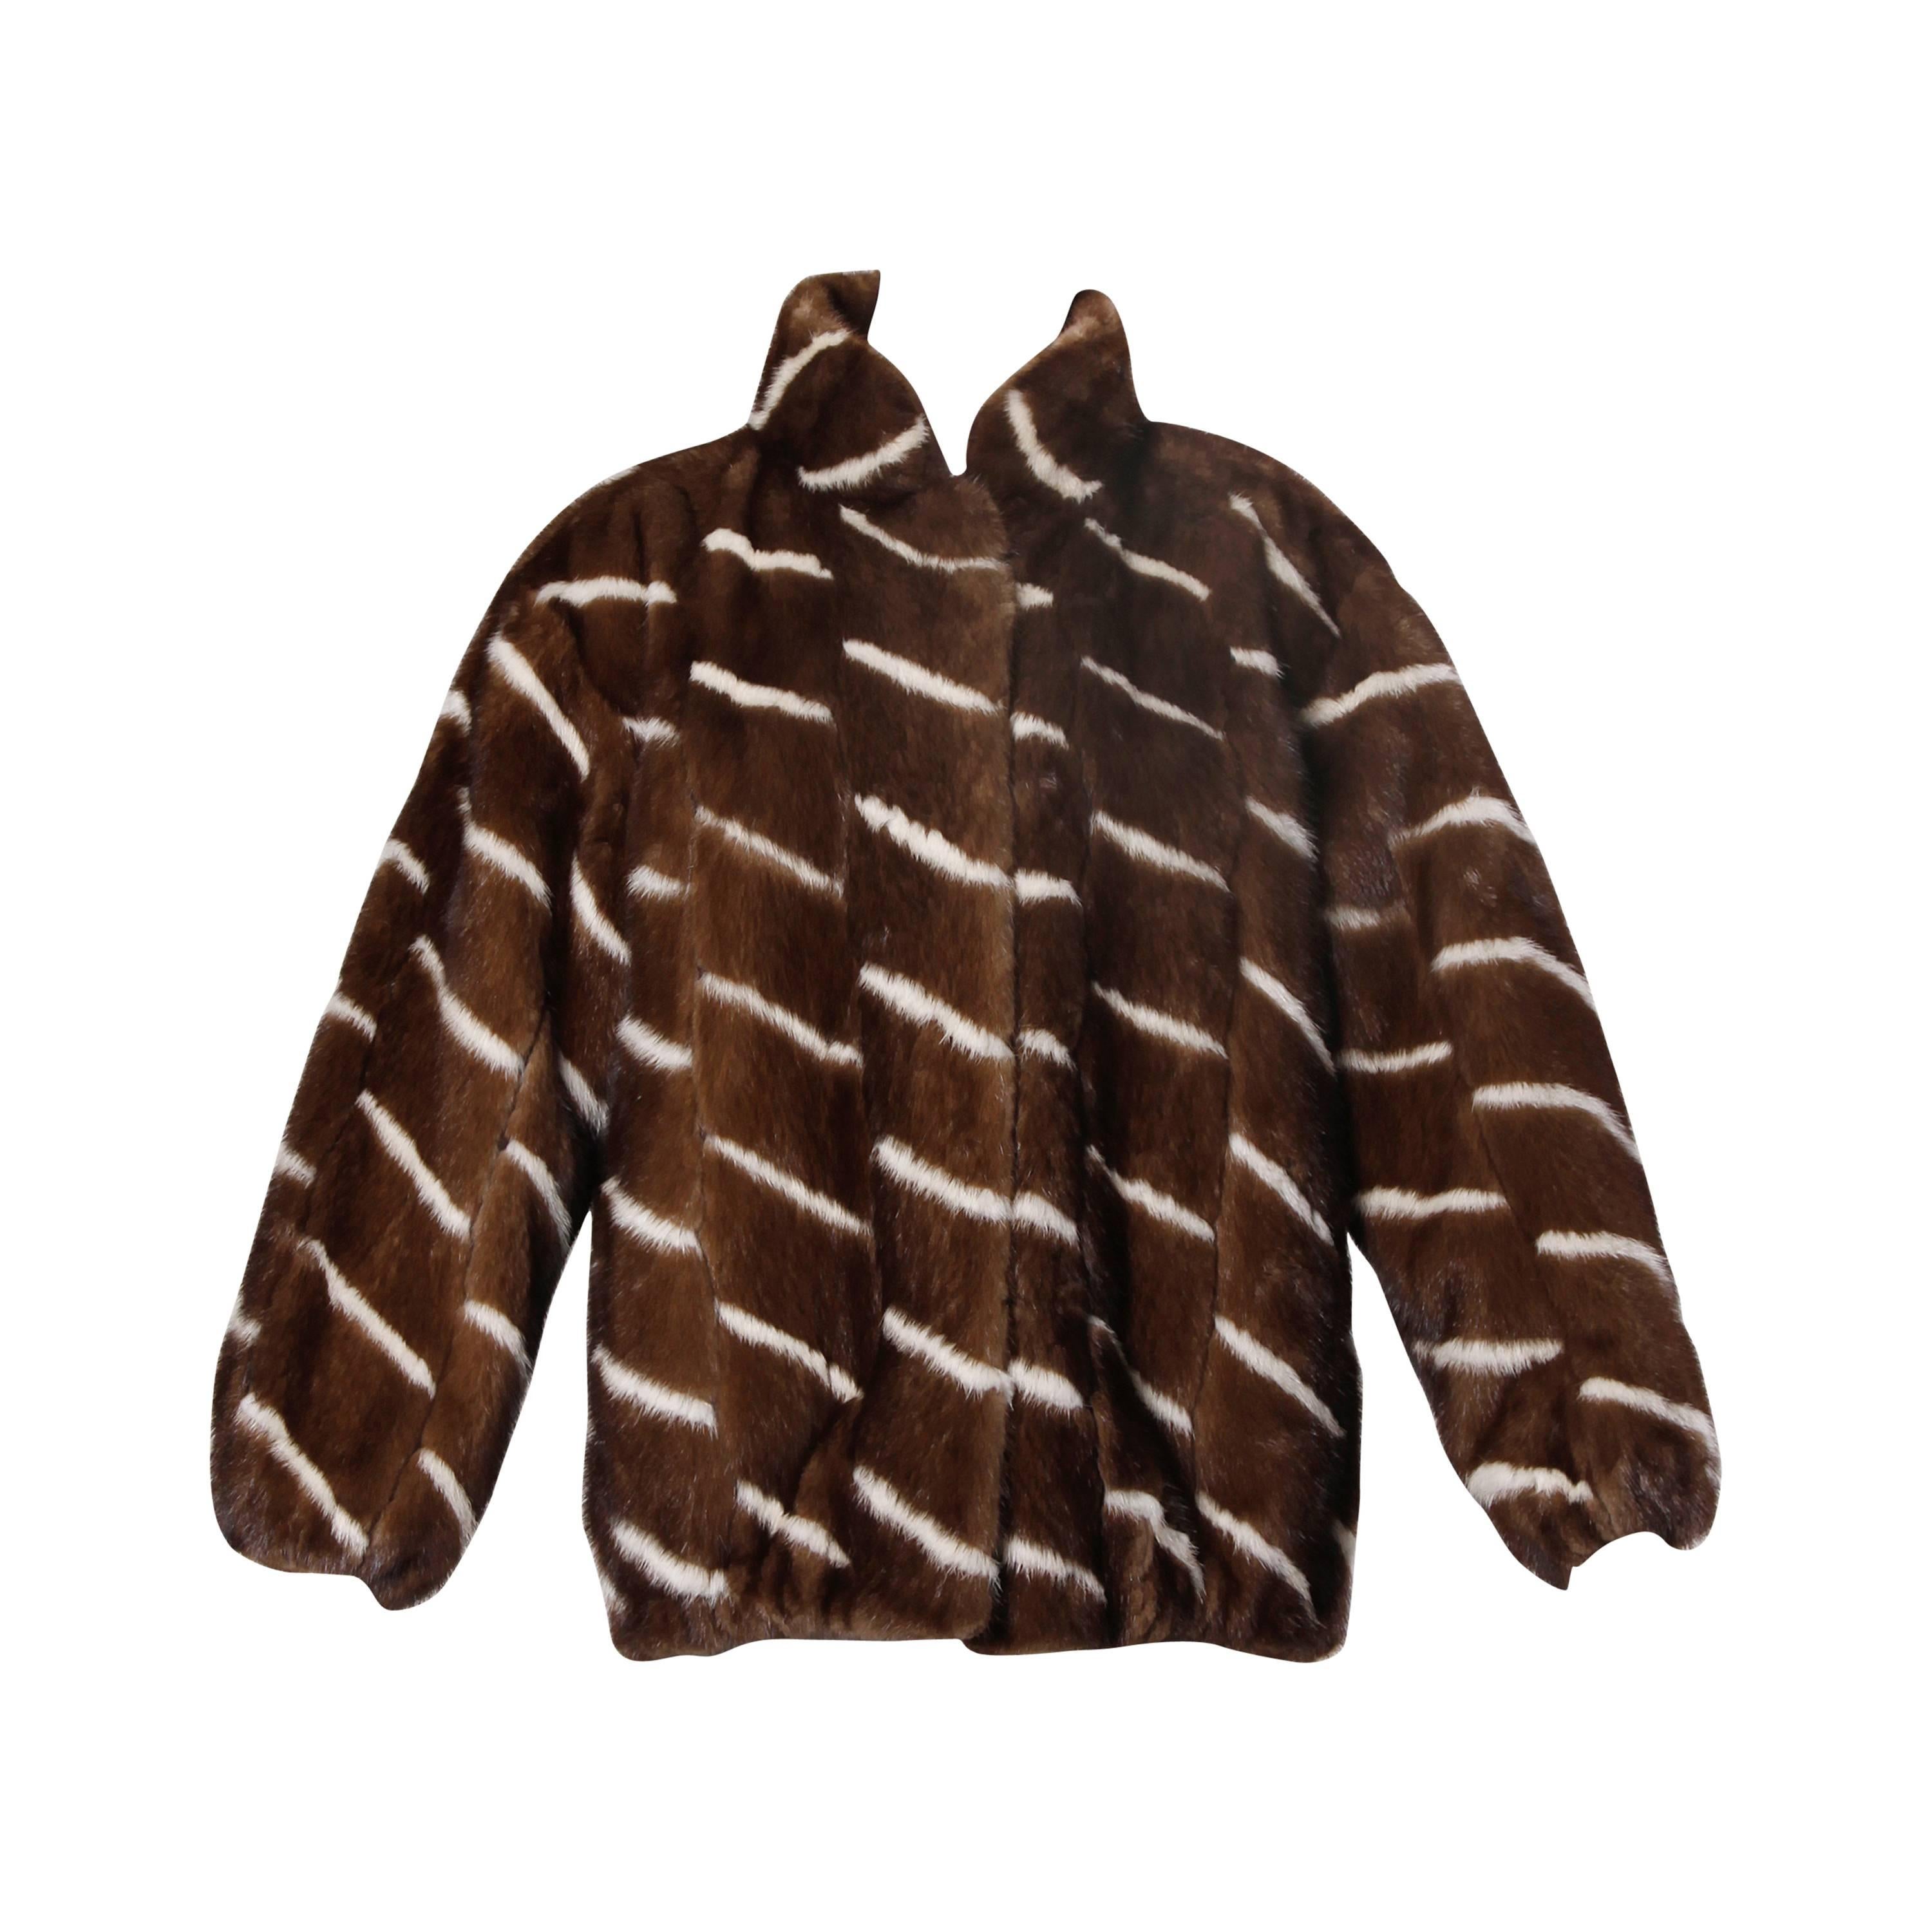 Vintage Brown + White Striped Mink Fur Jacket with Leather Lining